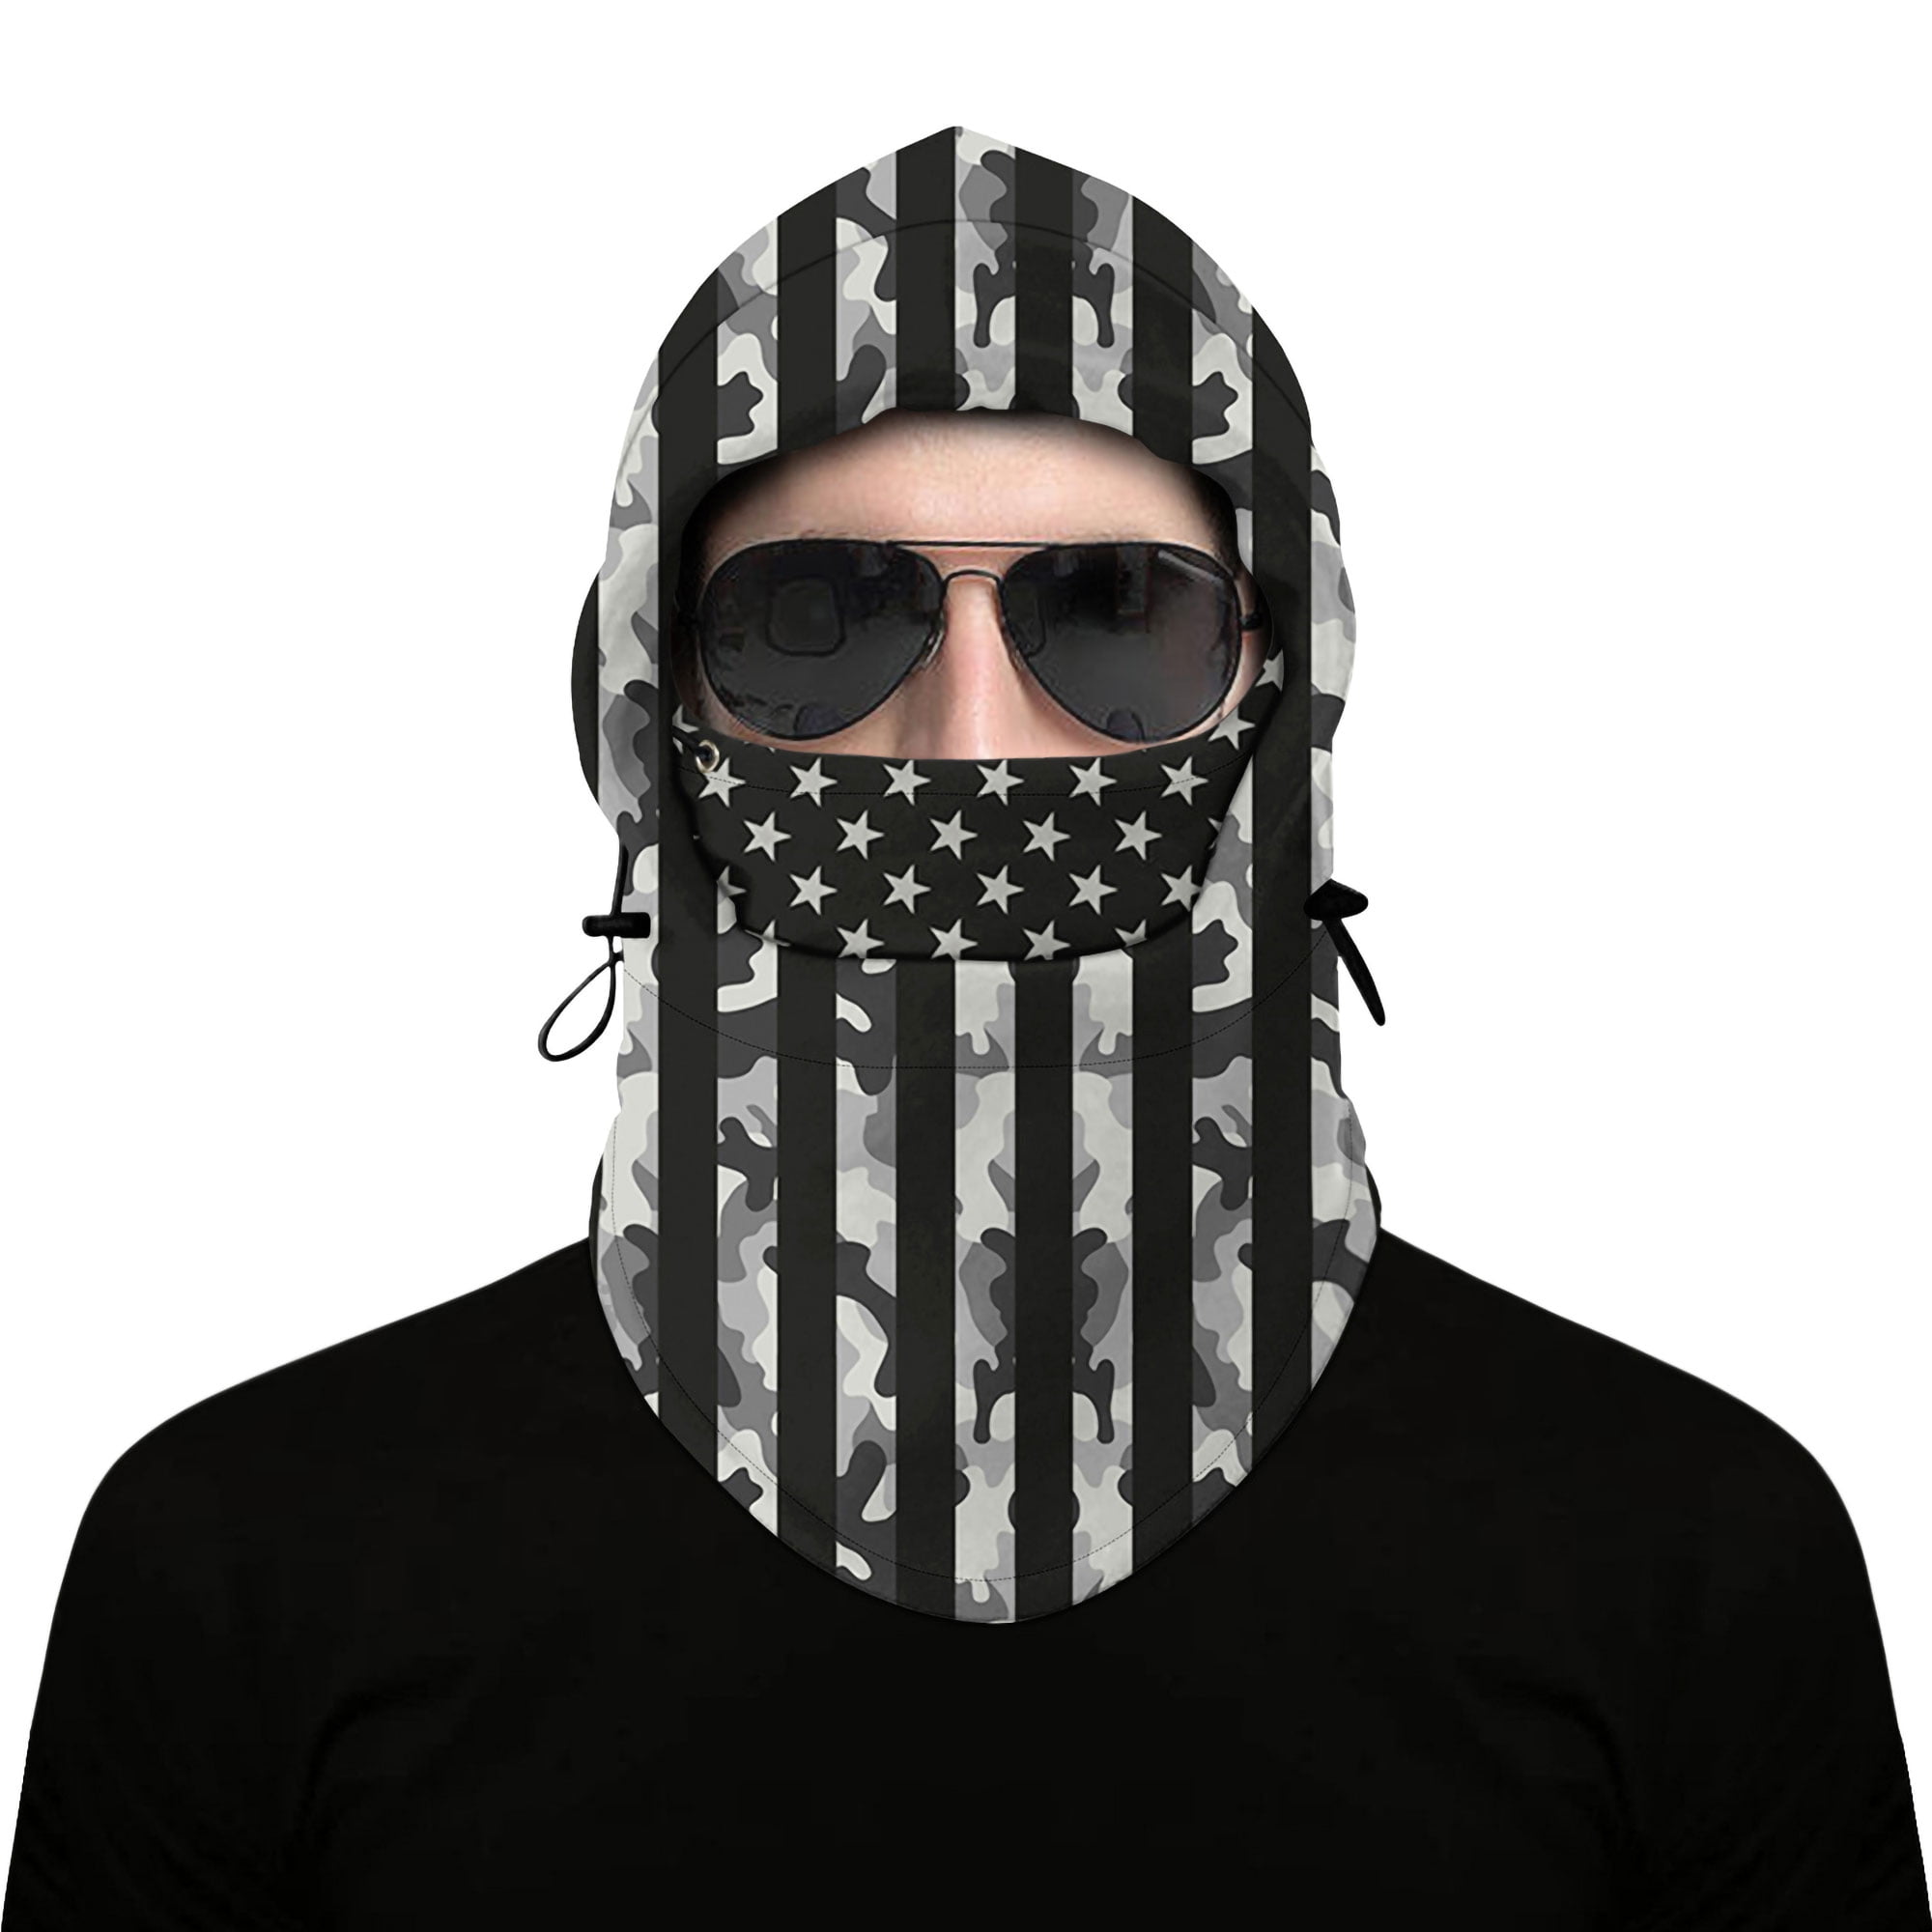 Details about   Mouth Cover FACE Sun Shield Neck Gaiter Masc Bandana Dust Outdoors Fishing Hunt 